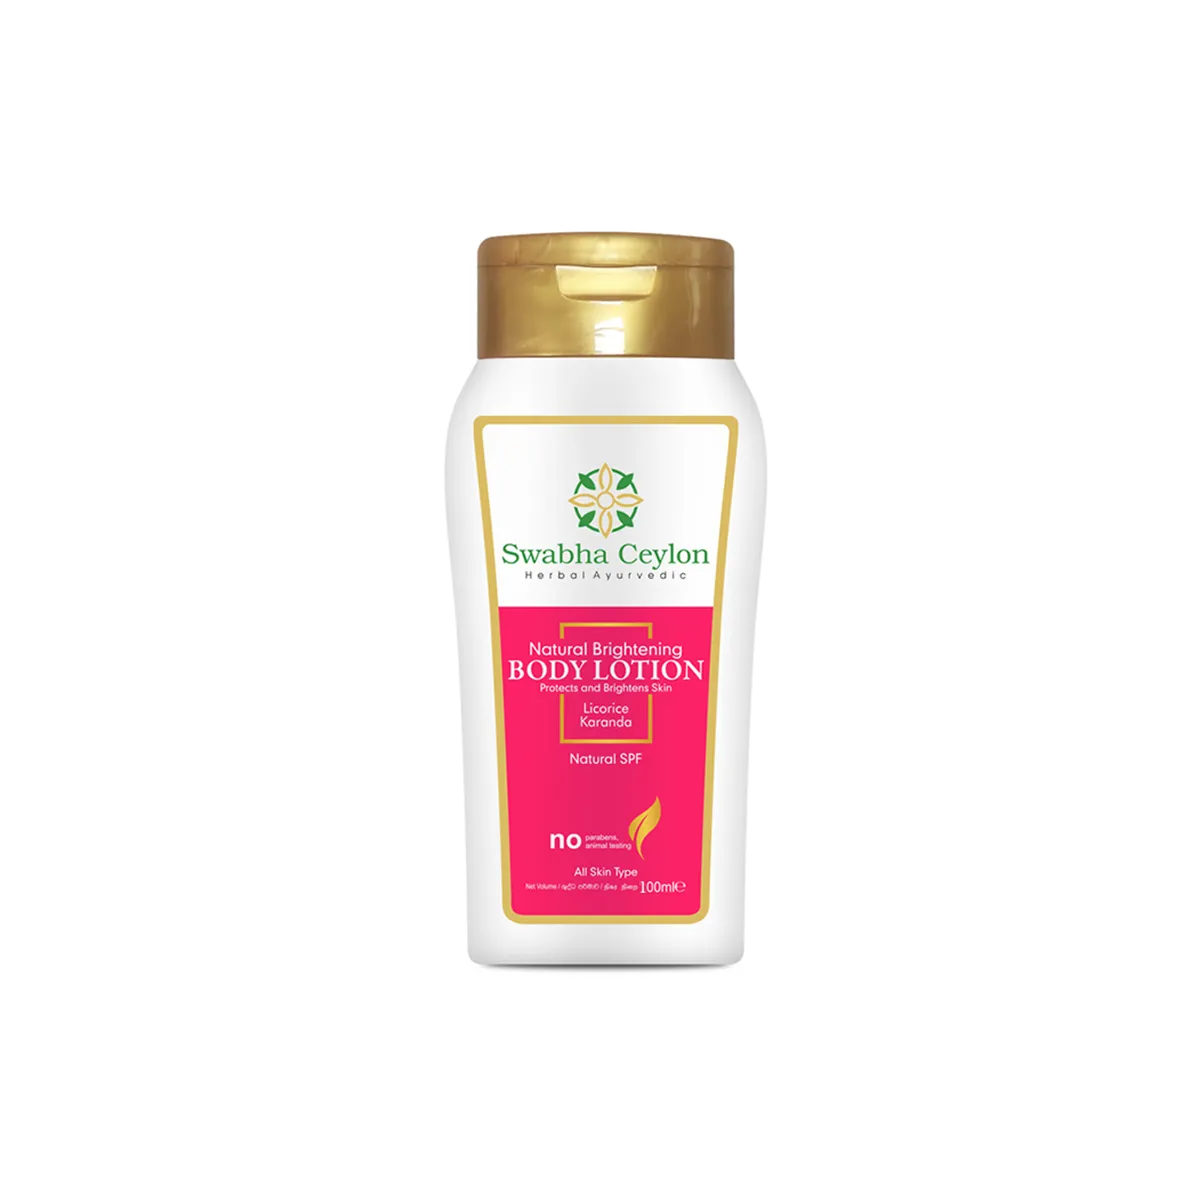 First product image of Swabha Ceylon Natural Brightening Body Lotion 100ml